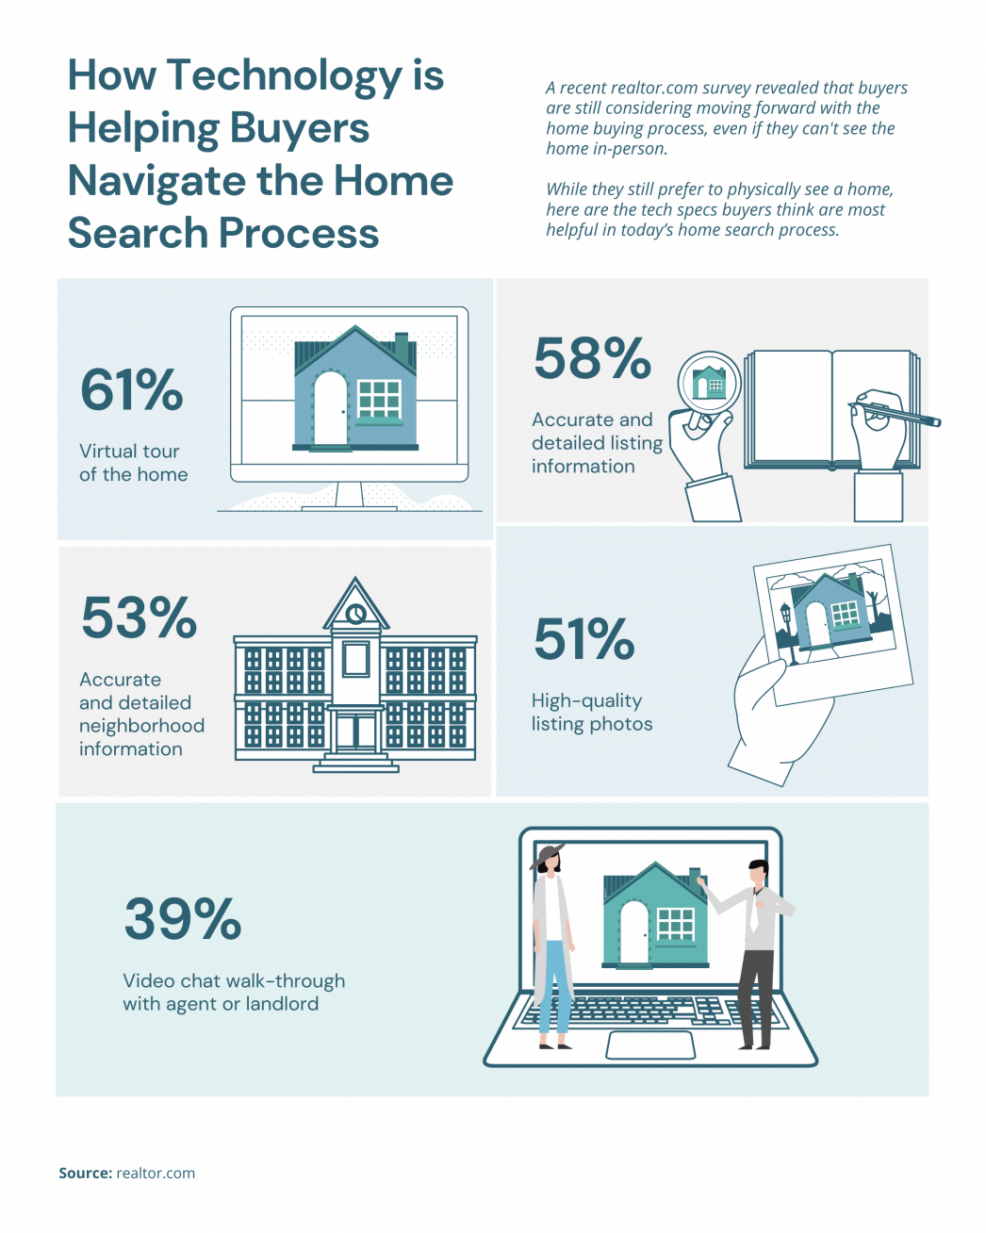 How Technology is Helping Buyers Navigate the Home Search Process